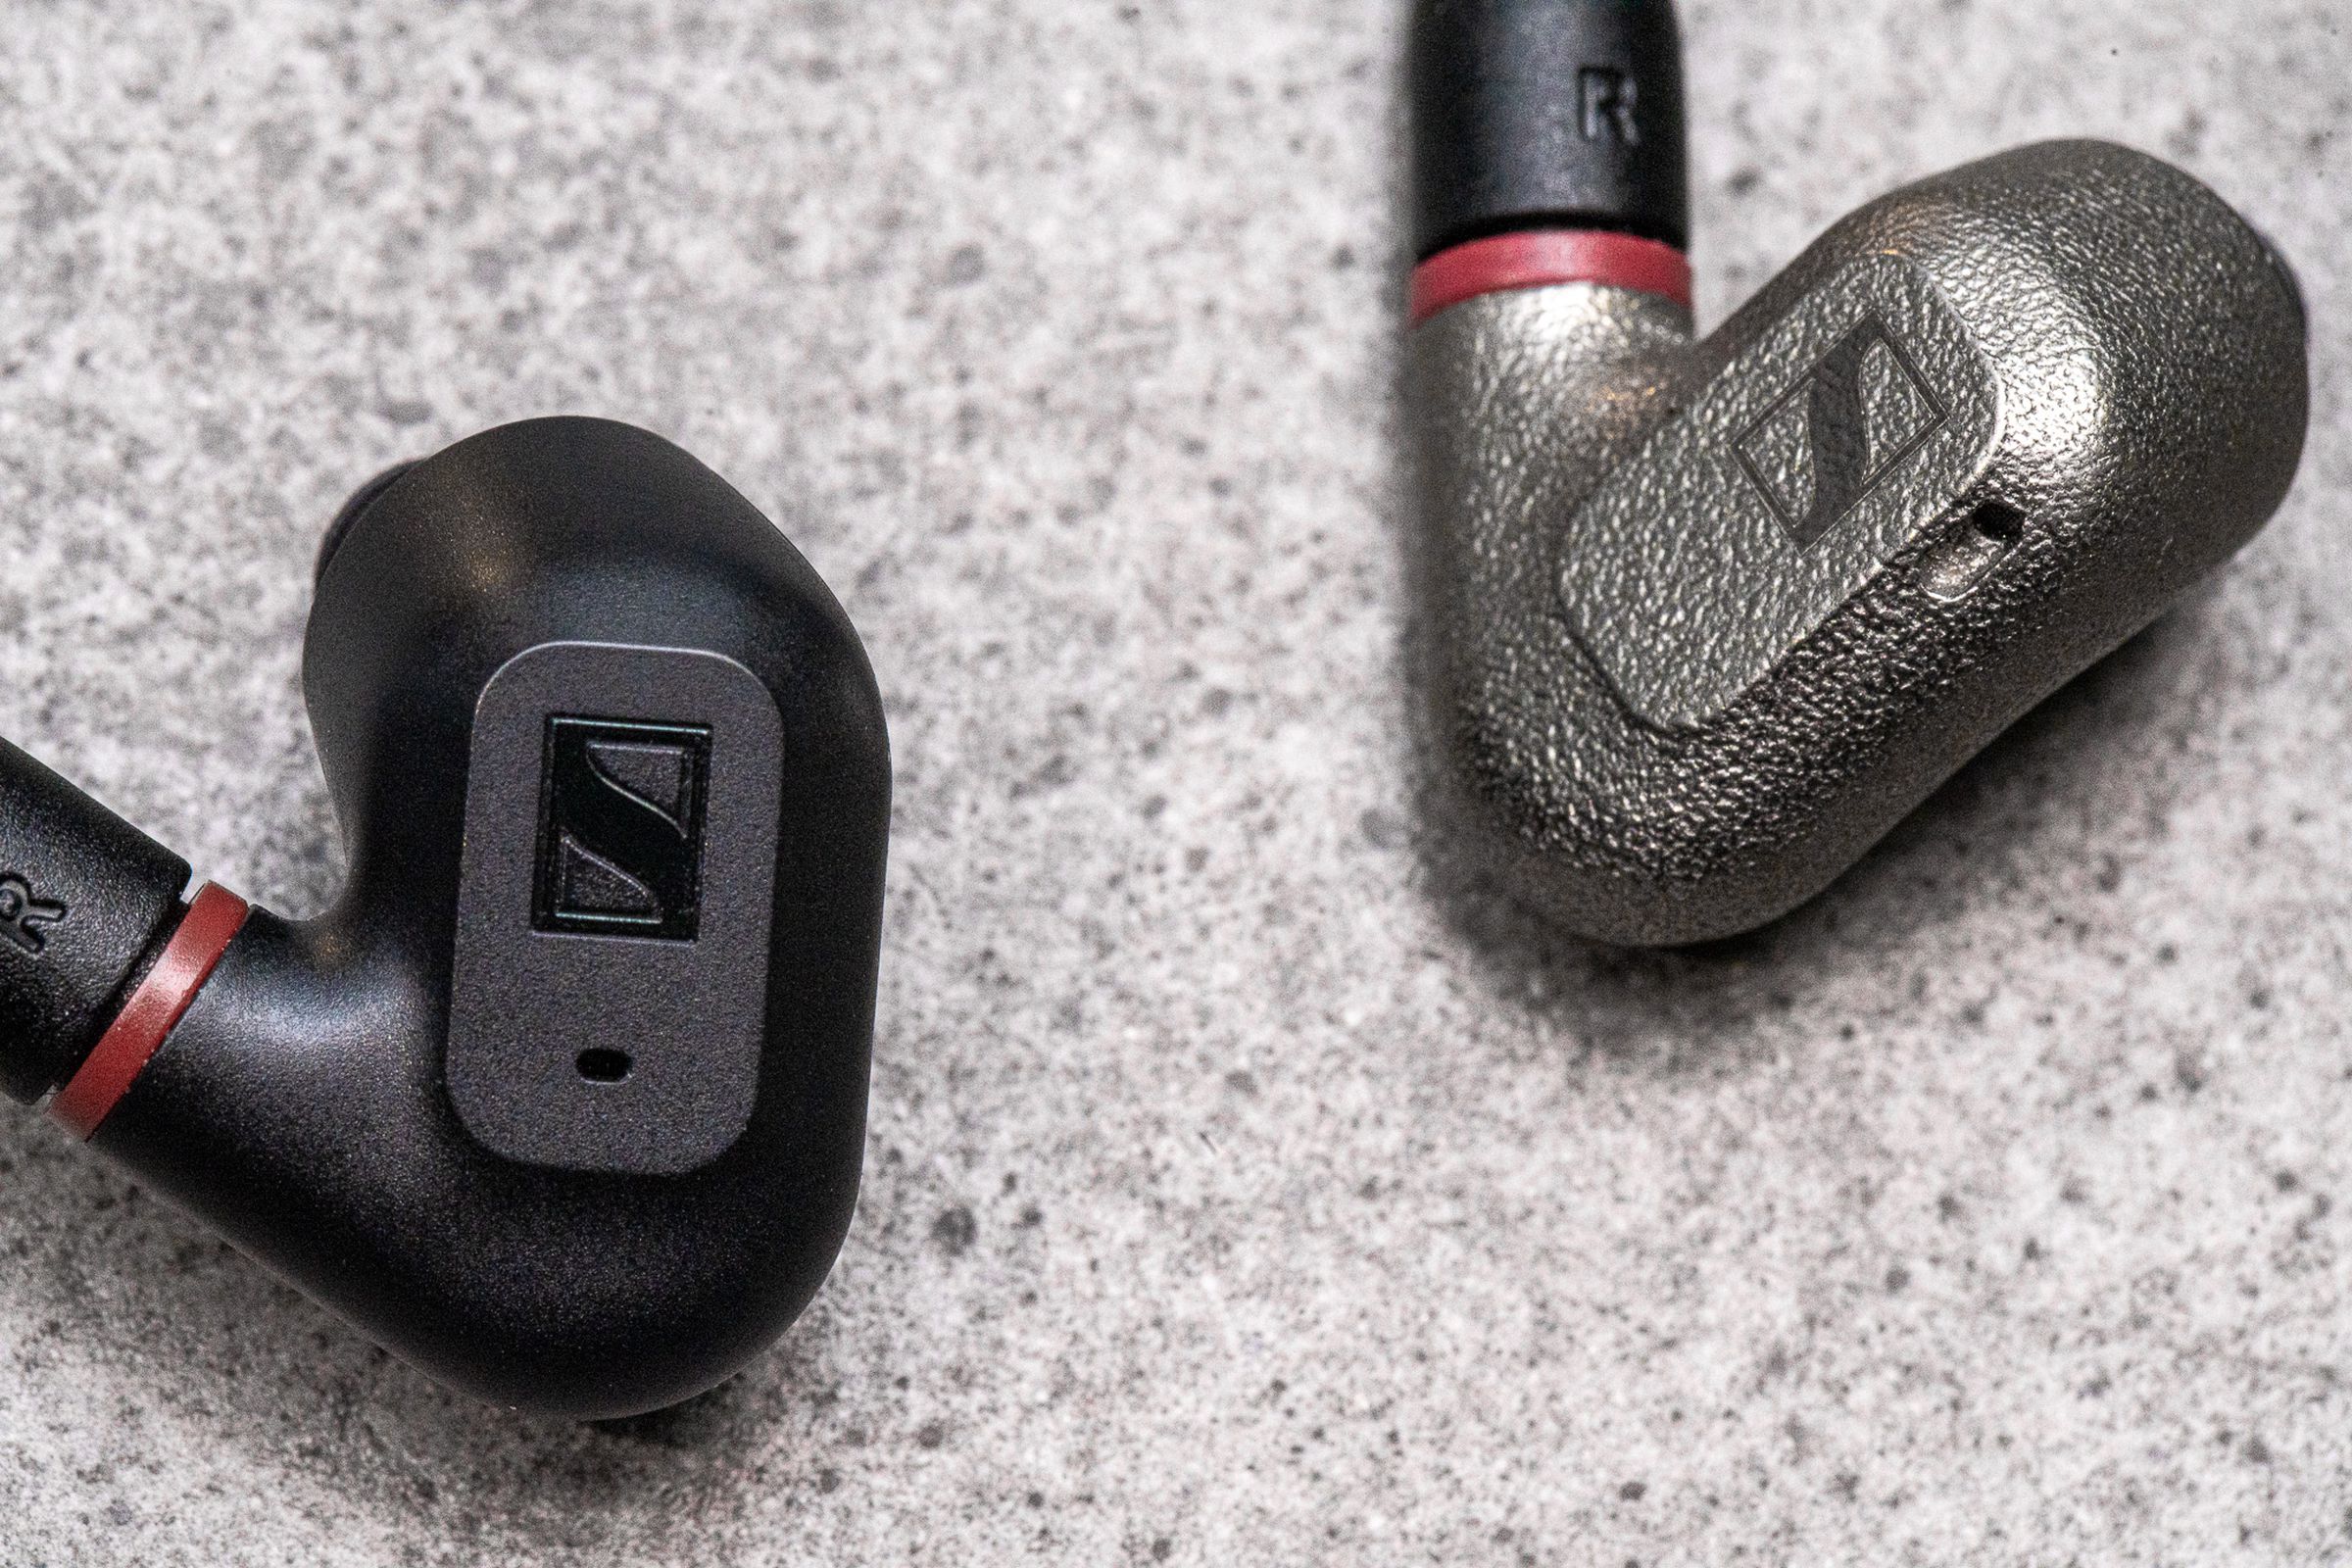 A photo comparing the housing material of Sennheiser's IE 200 and IE 600 earbuds.